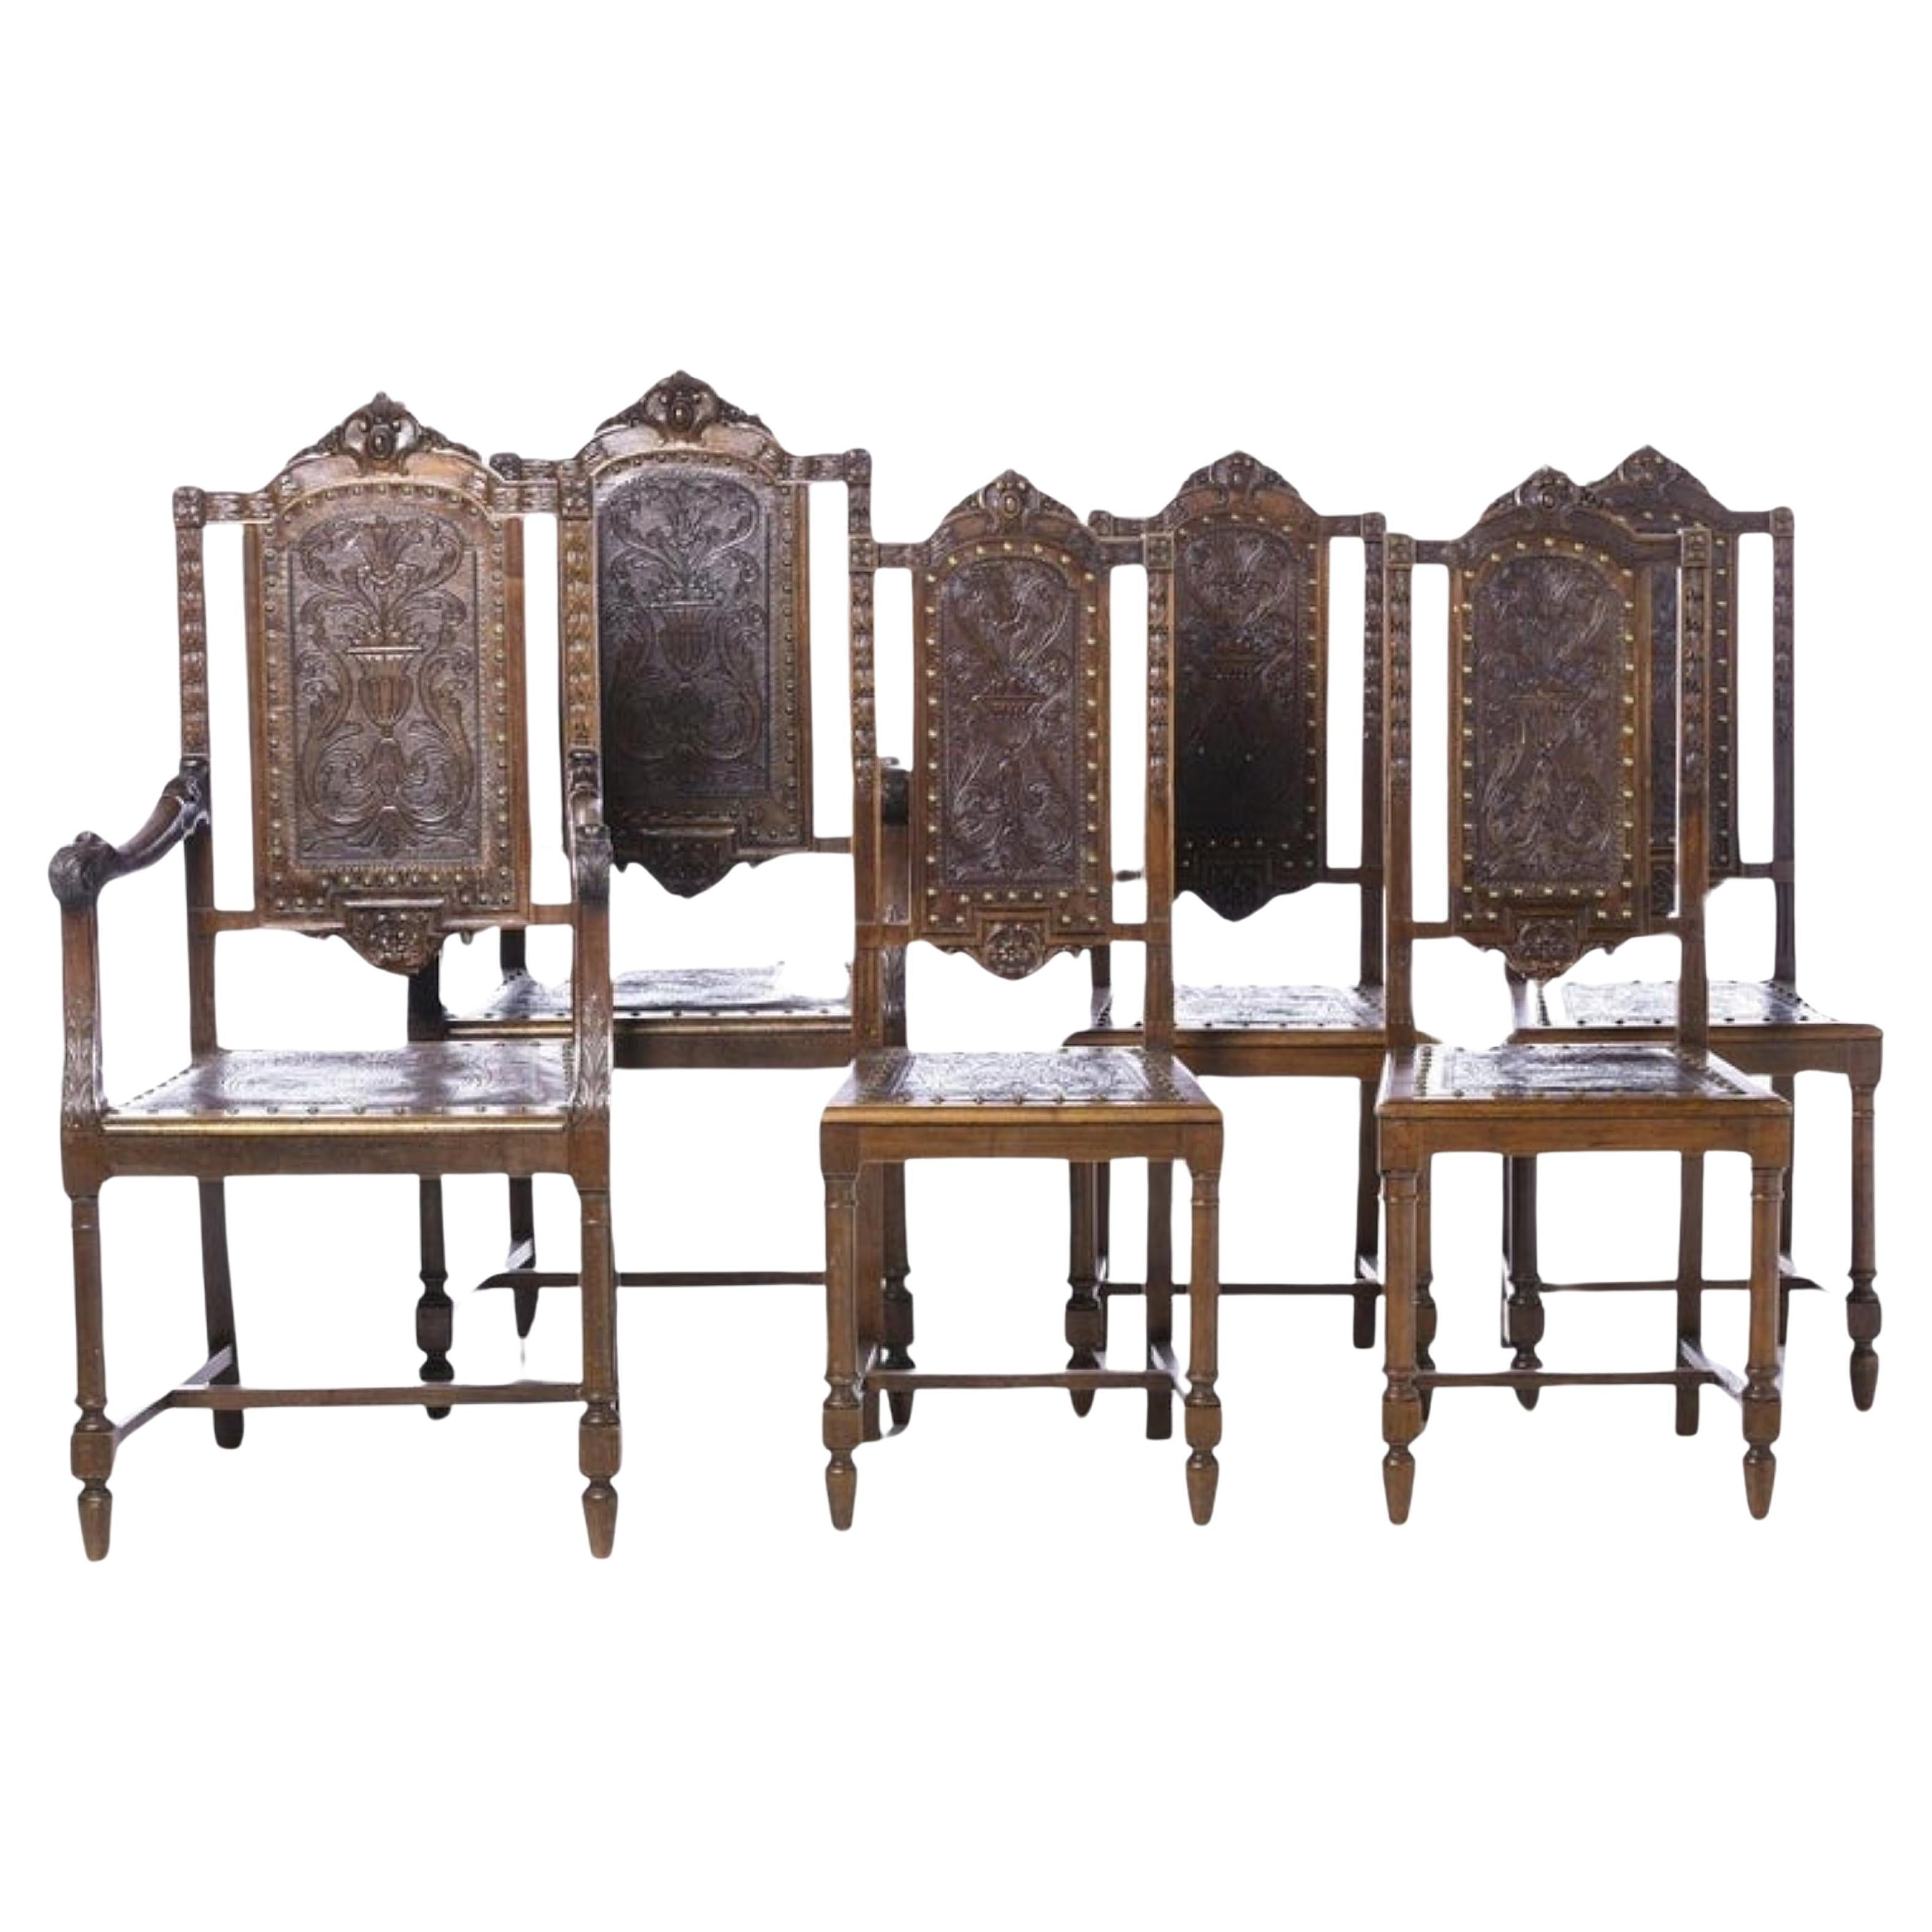 THREE PORTUGUESE ARMCHAIRS AND SIX CHAIRS 19th century 